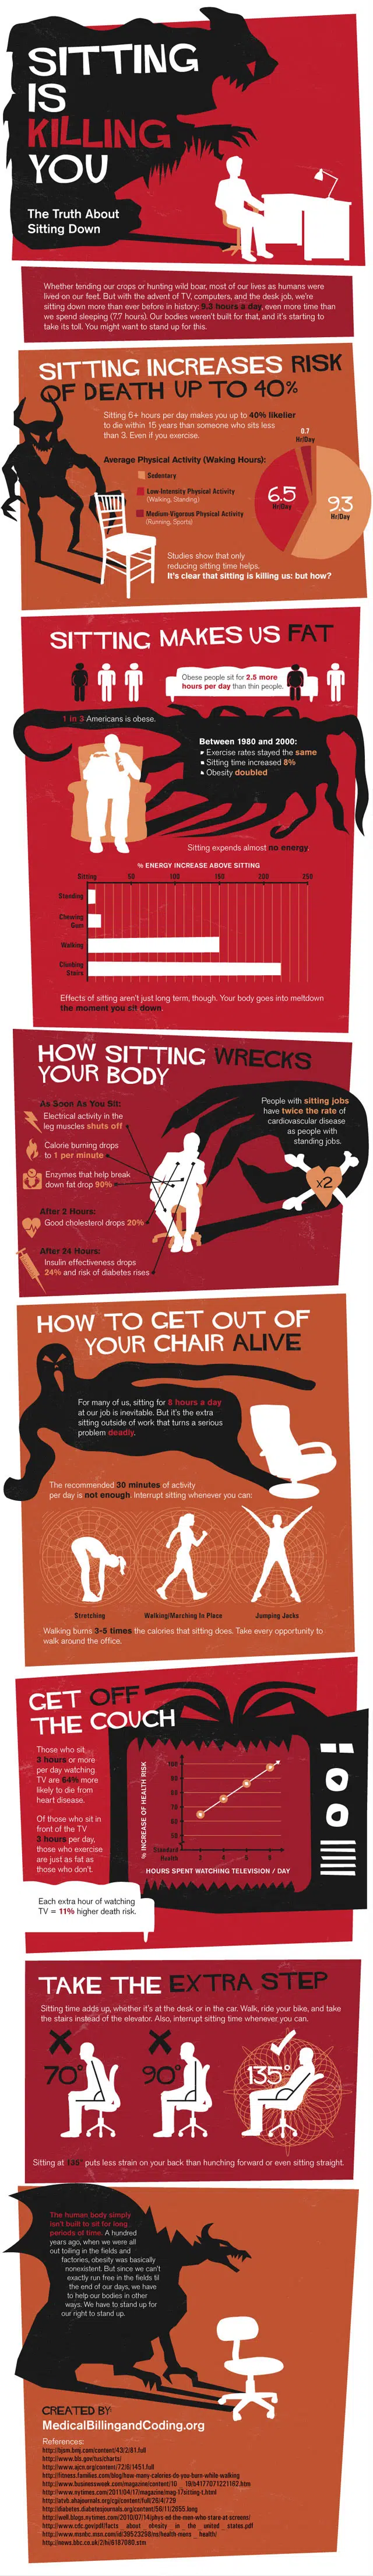 sitting down infographic